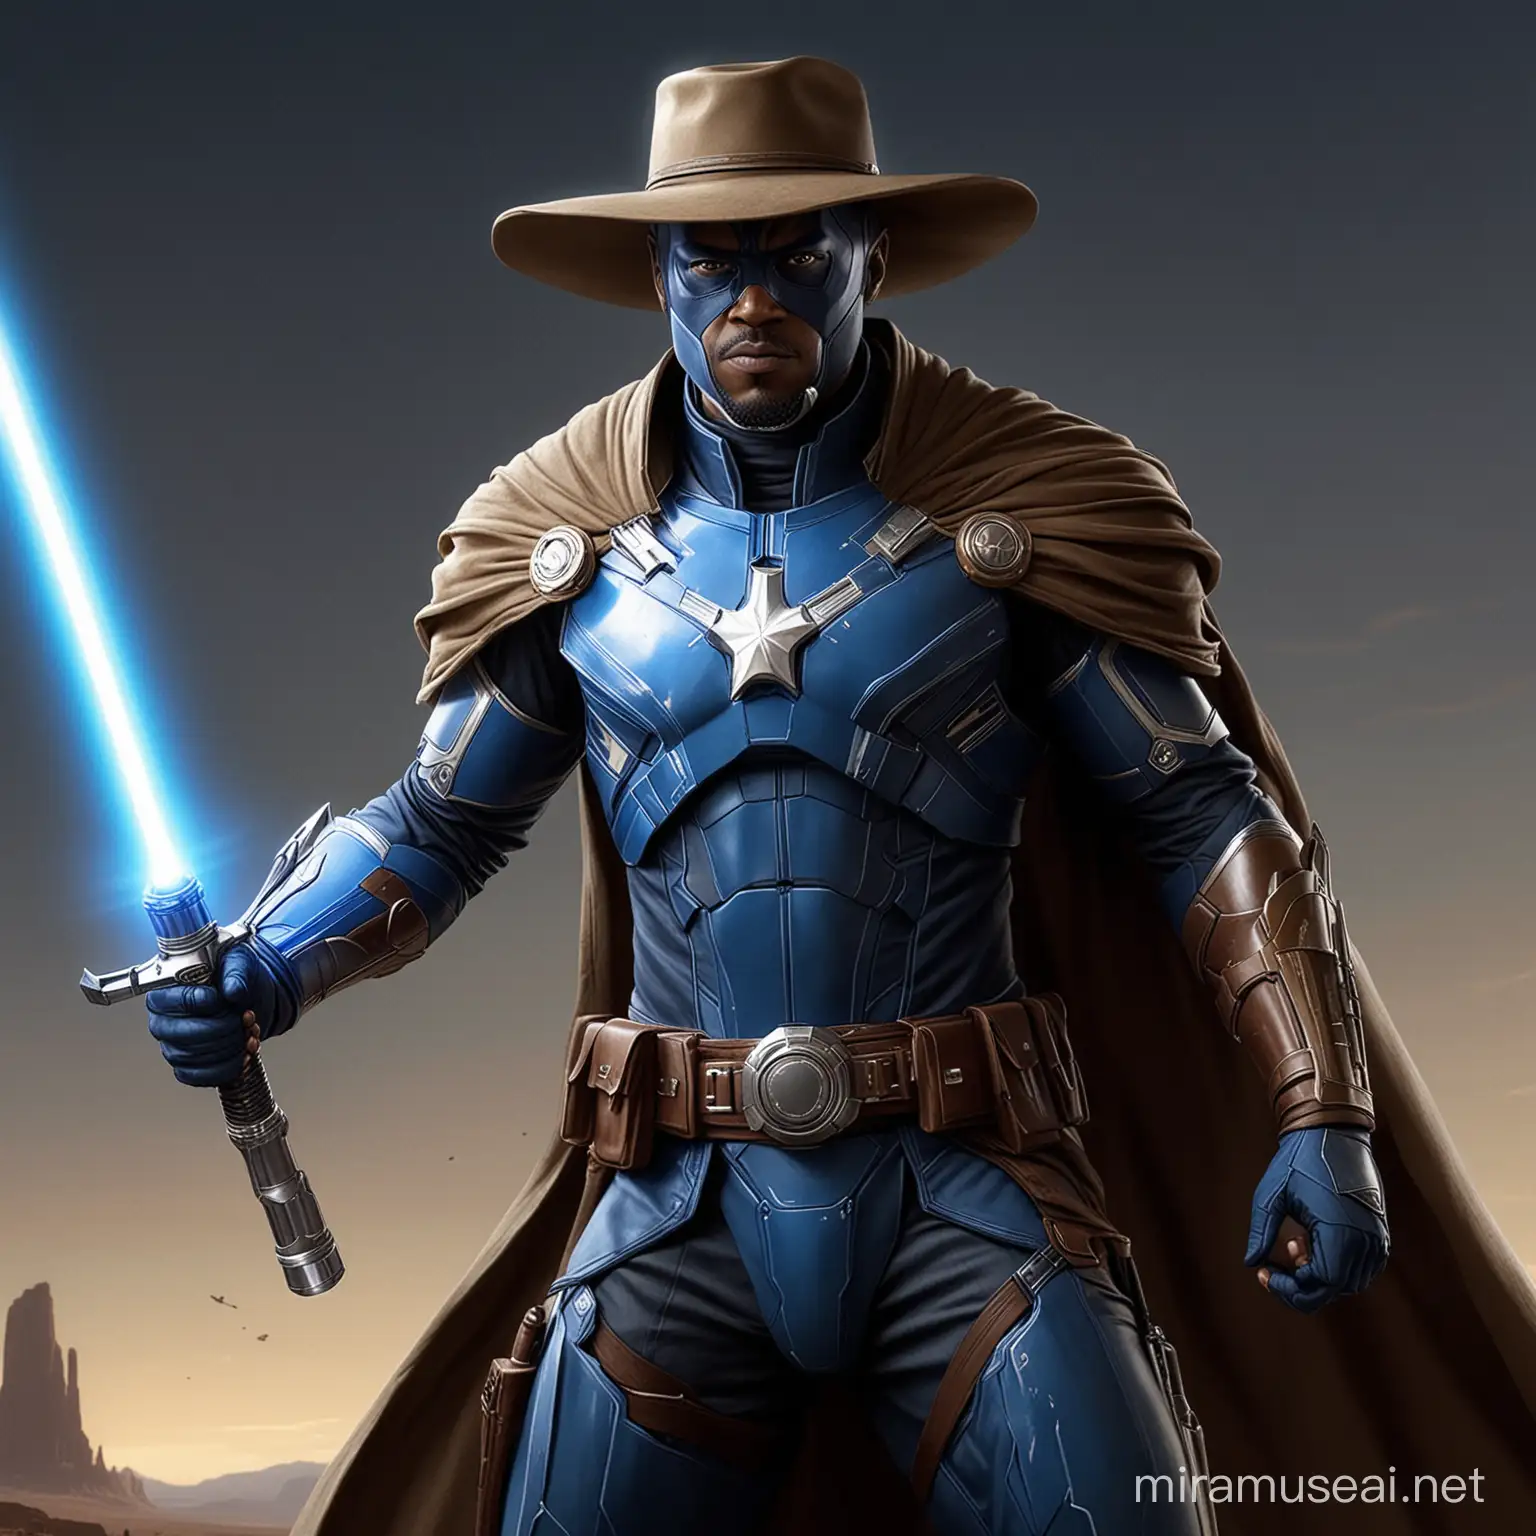 A hyper realistic image of Blue Marvel as a Star wars Jedi wearing blue armour and a brown cowboy hat, holding a white lightsaber, 